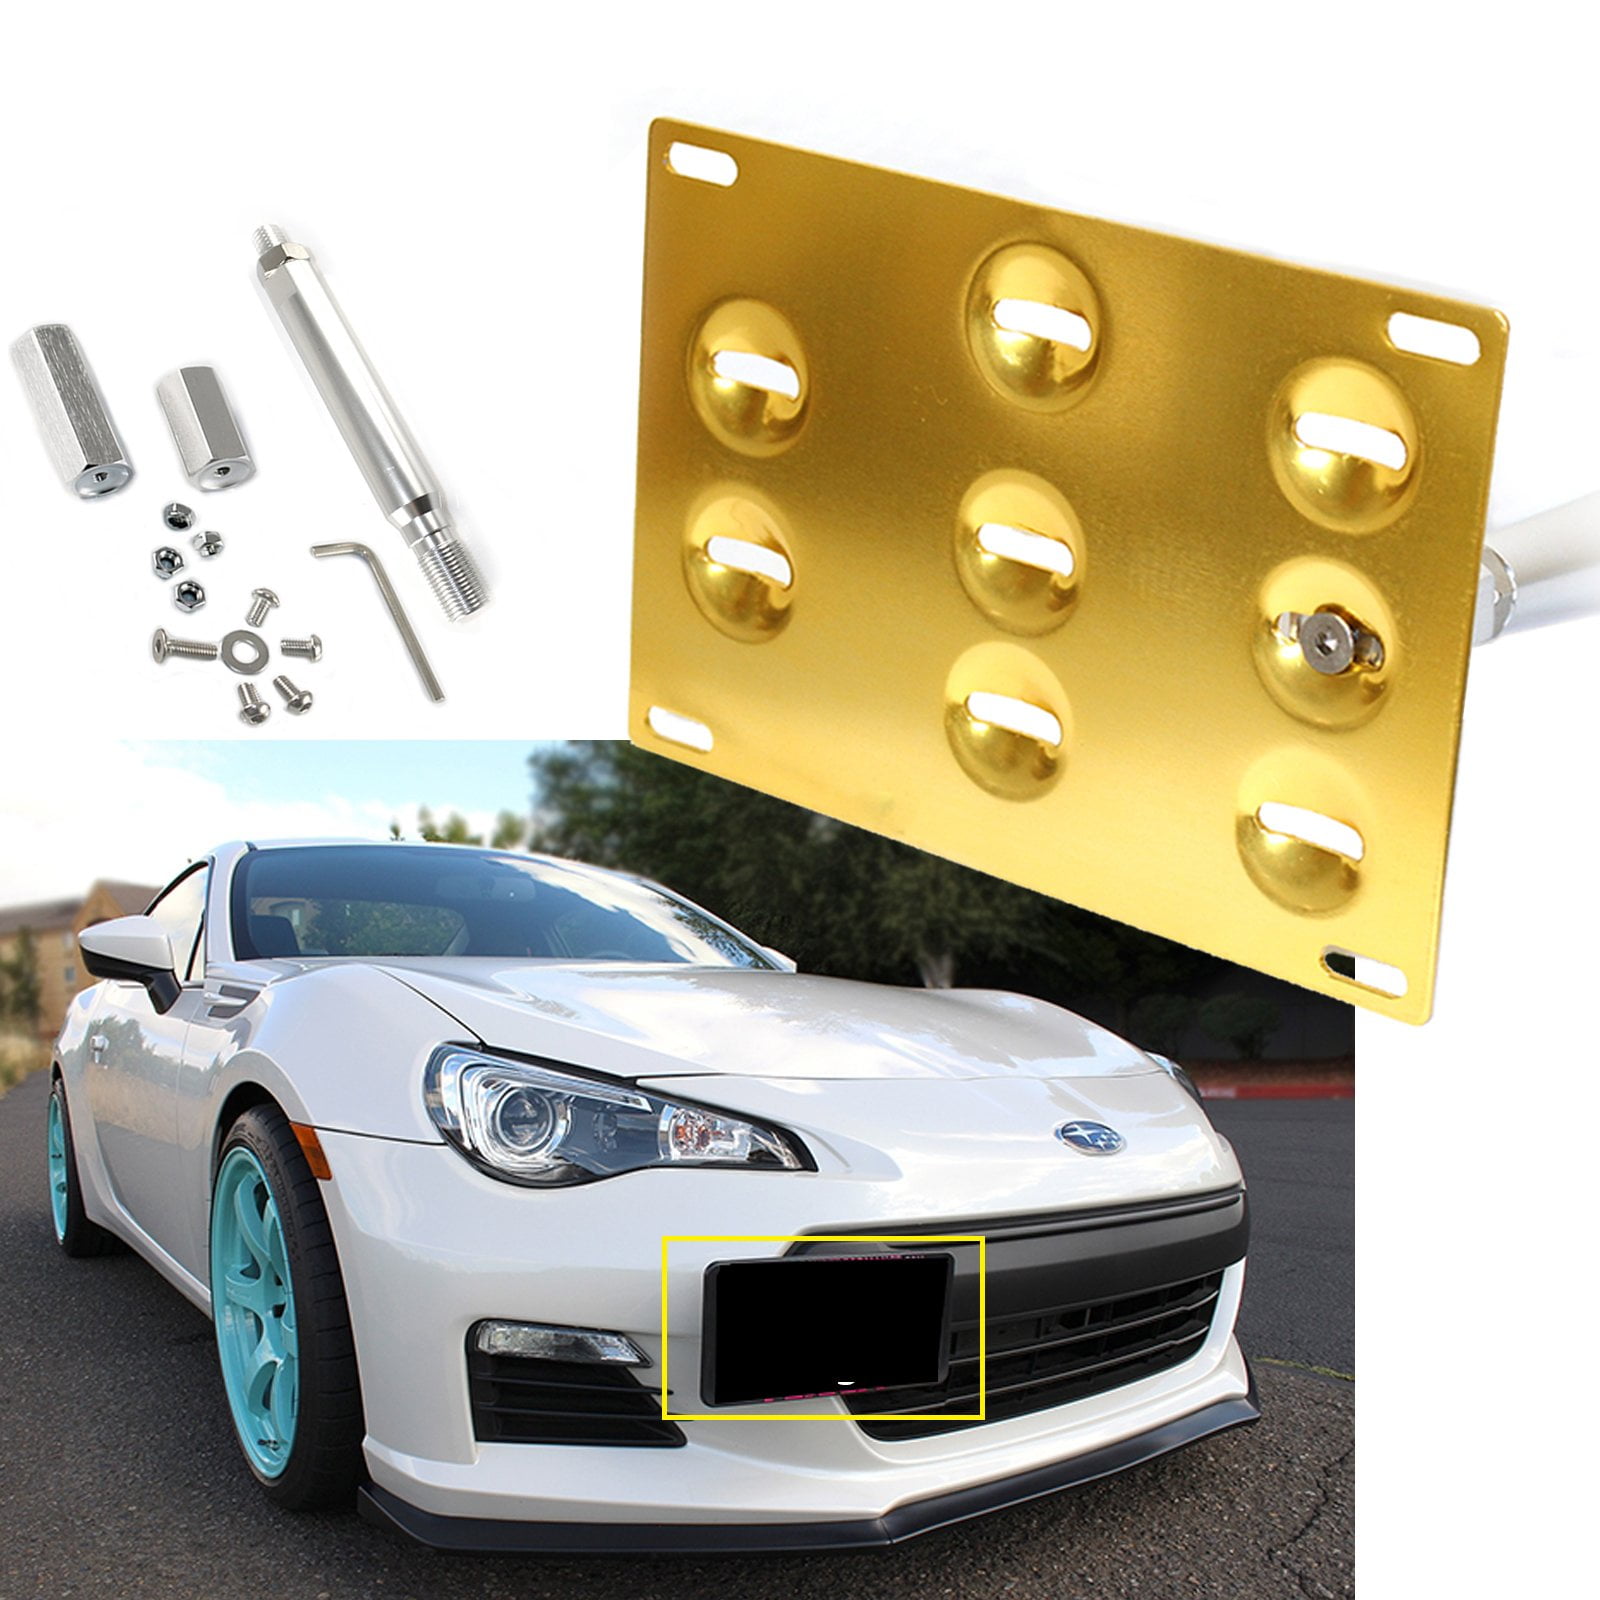 Type A-Red psler Car Towing Hook Ring Racing Front Rear Bumper Trailer Ring Eye Towing for Scion FR-S WRX STi 2015-2018 